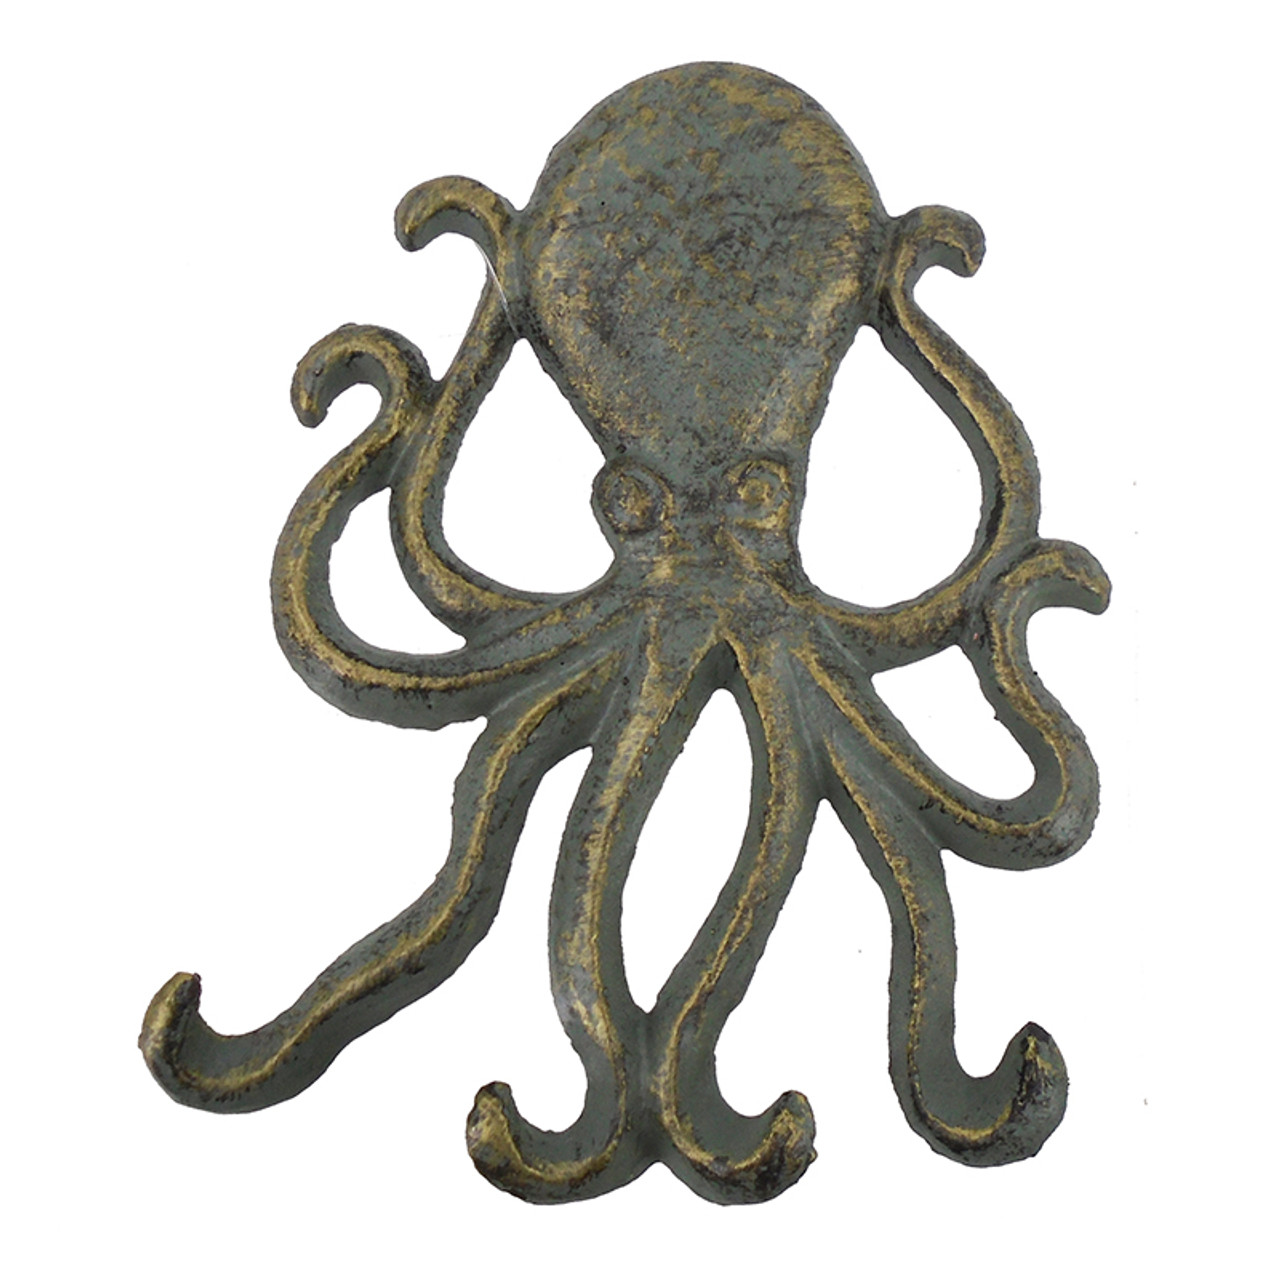 Sumnacon 6 Inch Cast Iron Octopus Coat Hook - Rustic Metal Wall Rack for  Key Towel Bag, Hat Scarf with Screws, Decorative Duty Clothing Hanger for